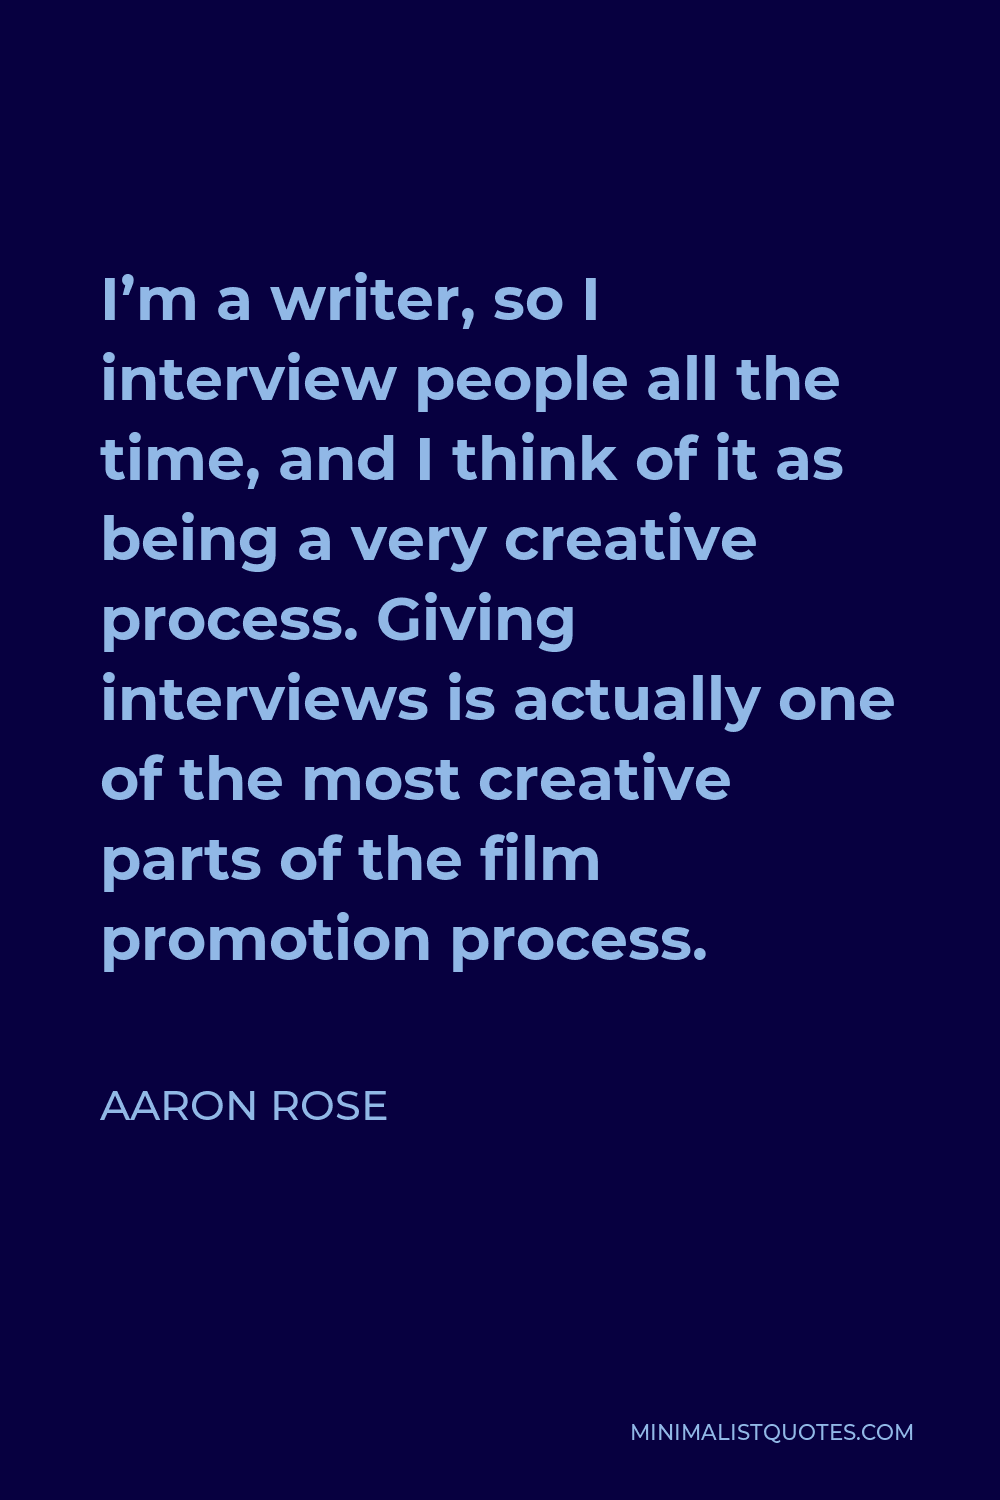 Aaron Rose Quote - I’m a writer, so I interview people all the time, and I think of it as being a very creative process. Giving interviews is actually one of the most creative parts of the film promotion process.